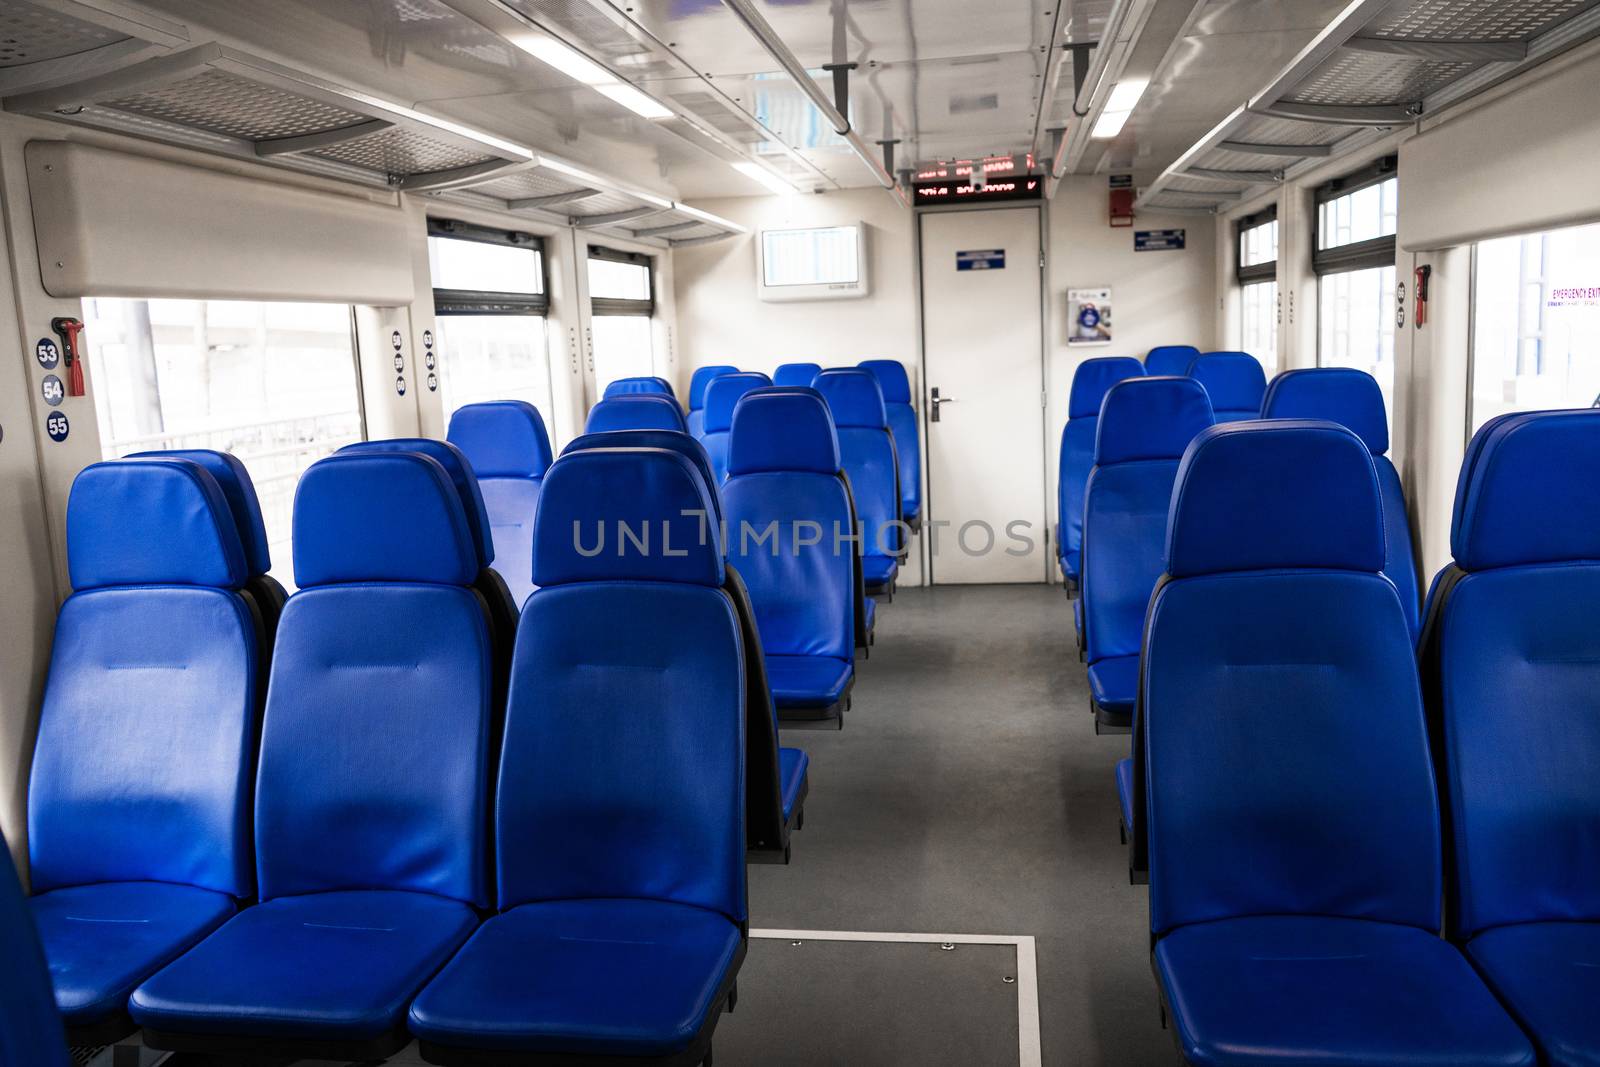 The interior of the transfer train to the airport. Rows of blue armchairs. Without people by Try_my_best